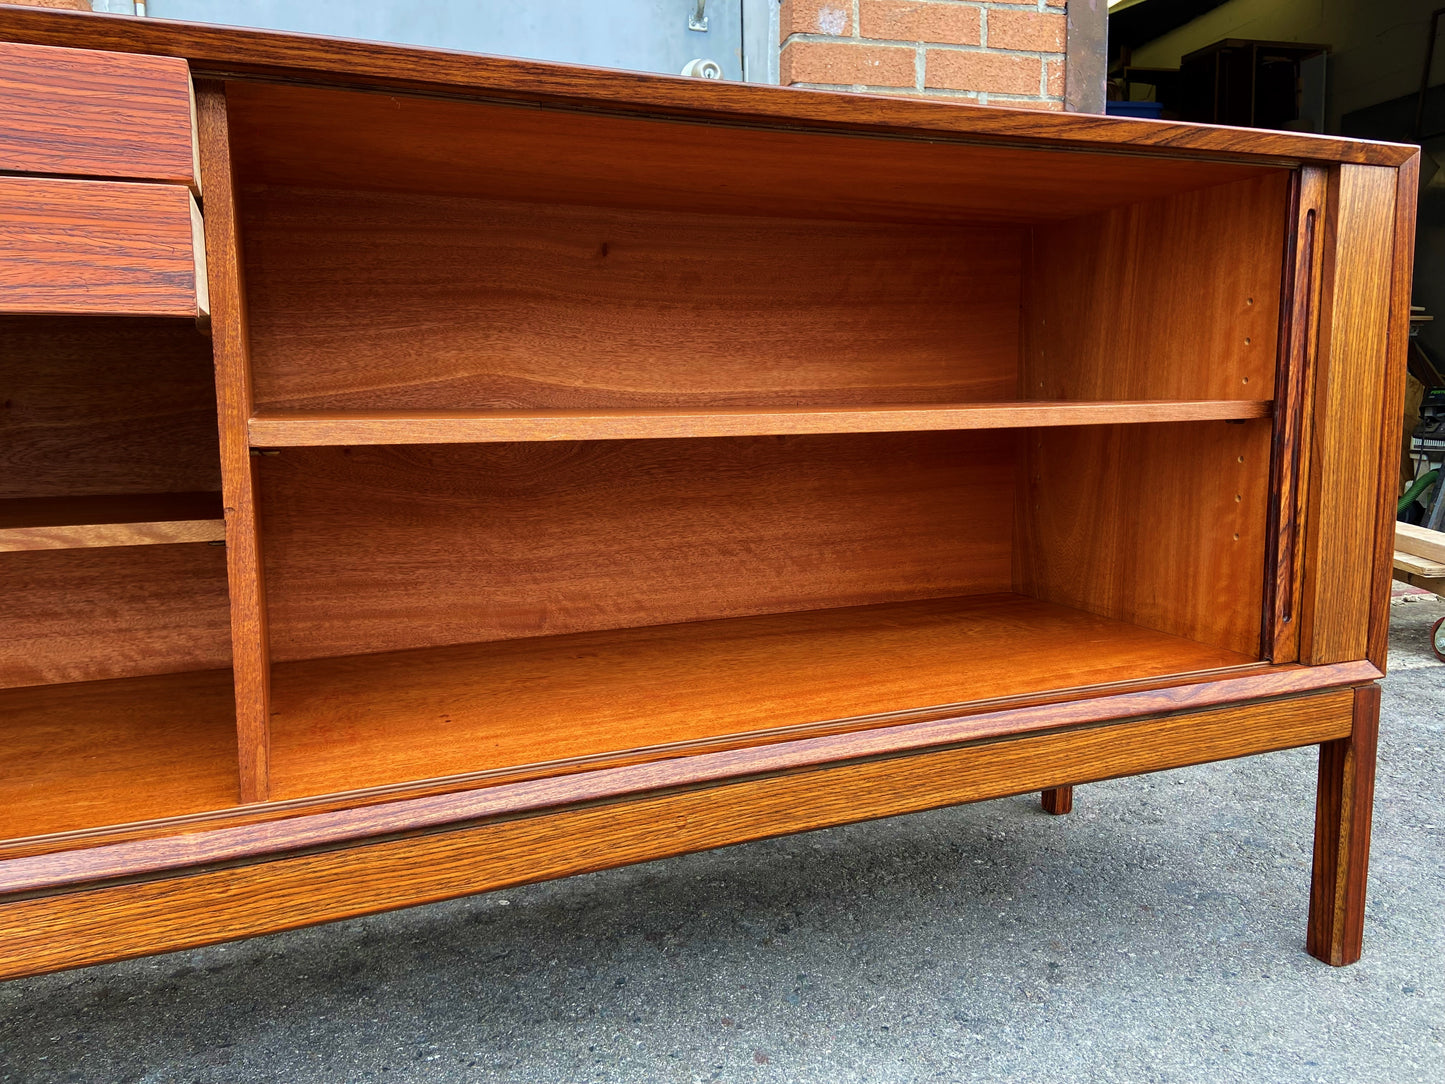 REFINISHED Danish Mid Century Modern Rosewood Credenza w Tambour Doors Finished Back 79"